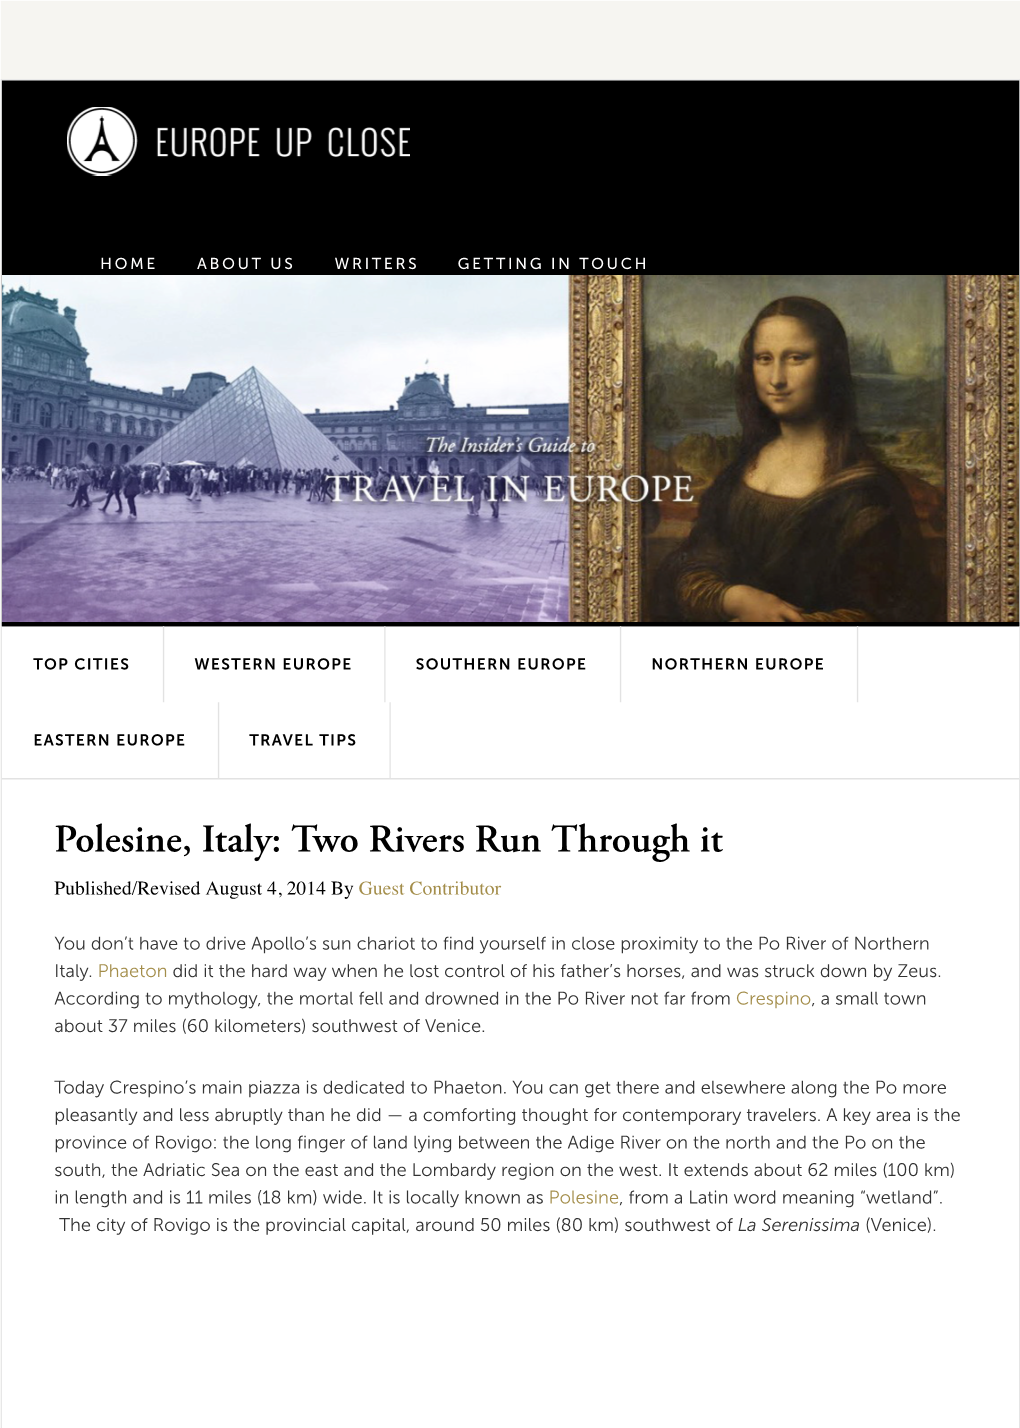 Polesine, Italy: Two Rivers Run Through It Published/Revised August 4, 2014 by Guest Contributor